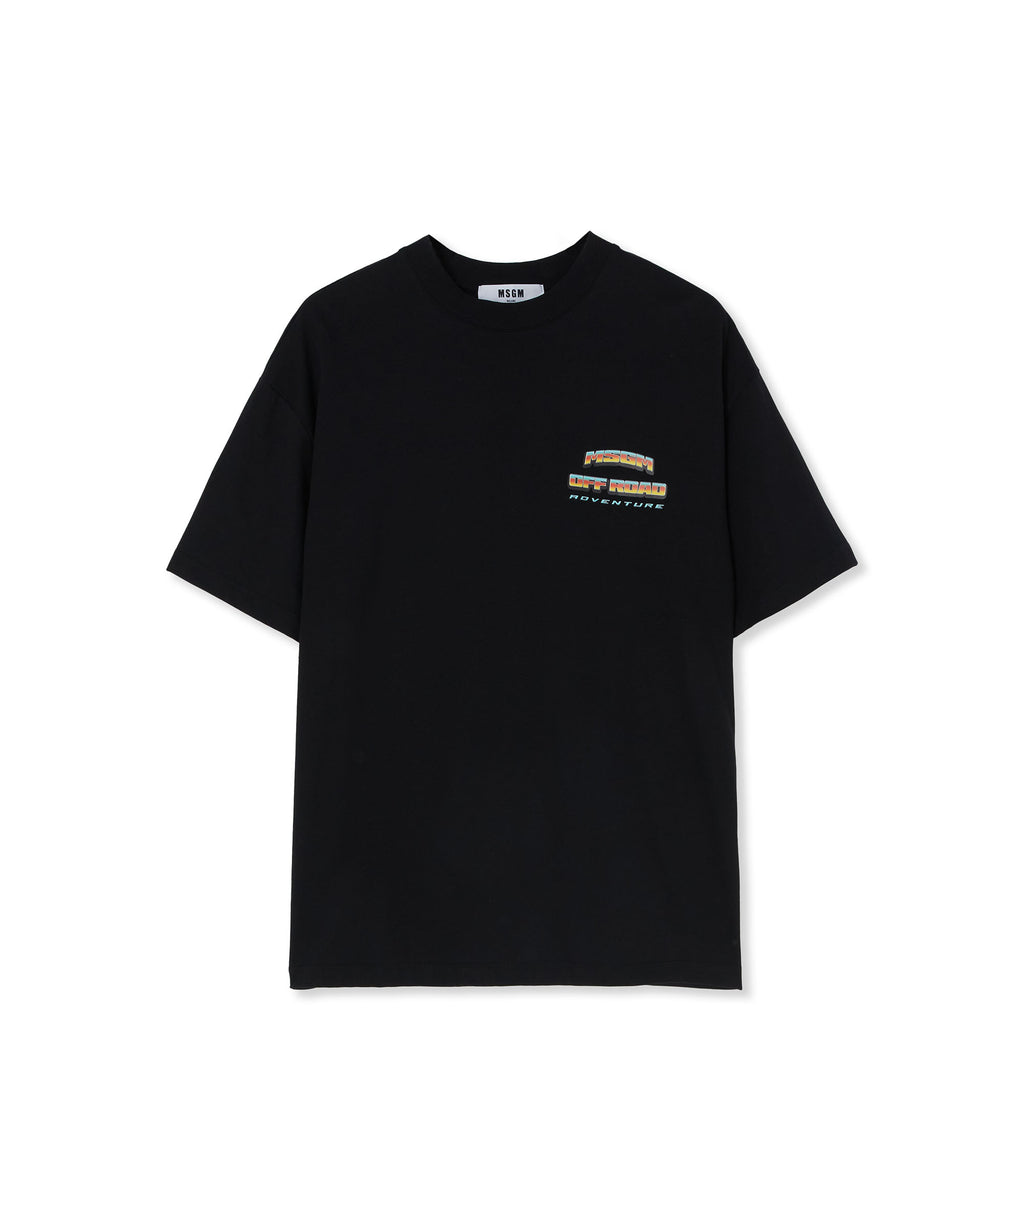 T-Shirt with Off road adventure graphic - MSGM Official